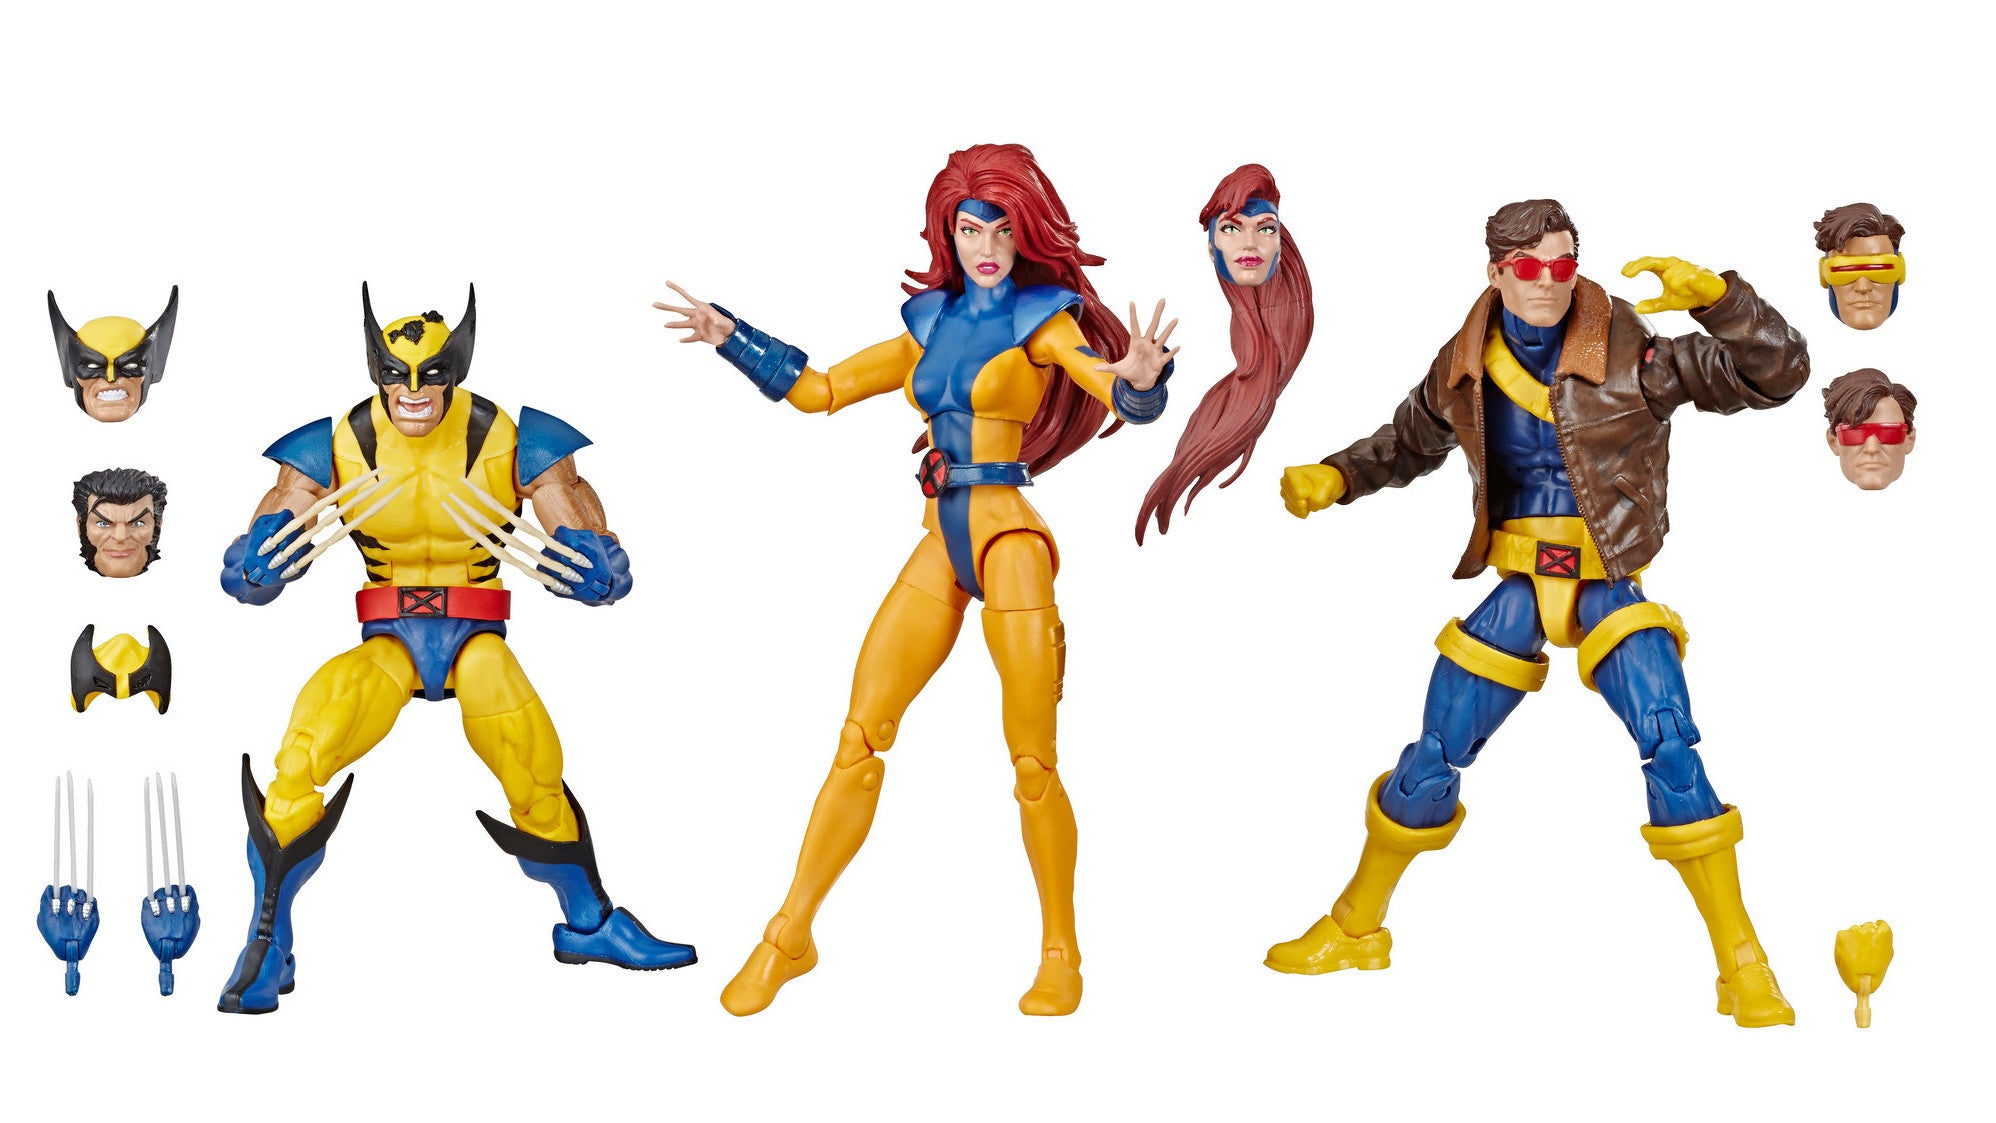 These X-Men Legends Figures Look Like They Stepped Right Out Of The ’90s TV Show